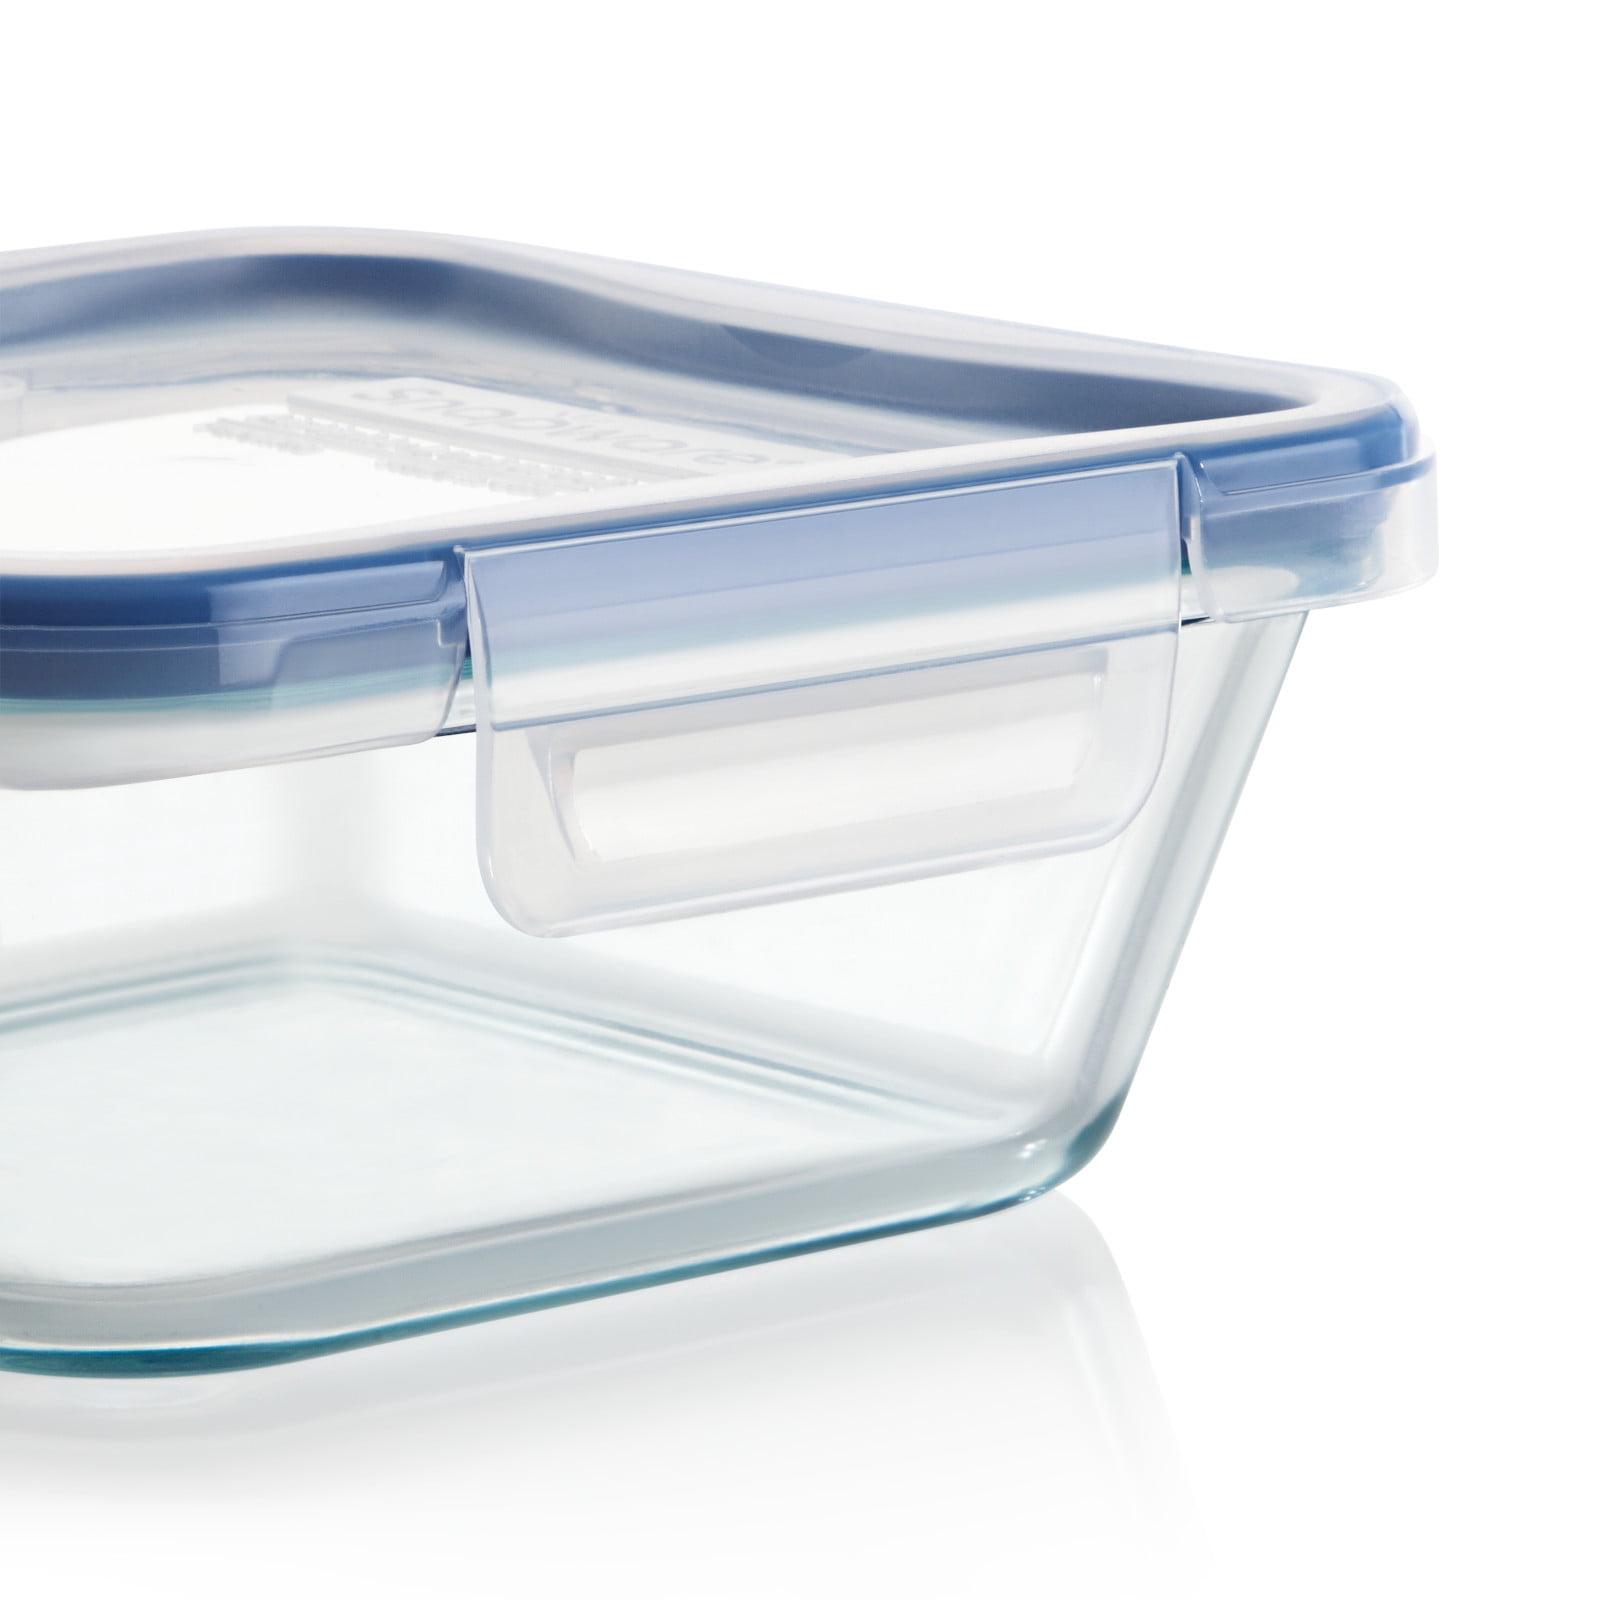 Total Solution® Pyrex® Glass 4-cup Square Food Storage with